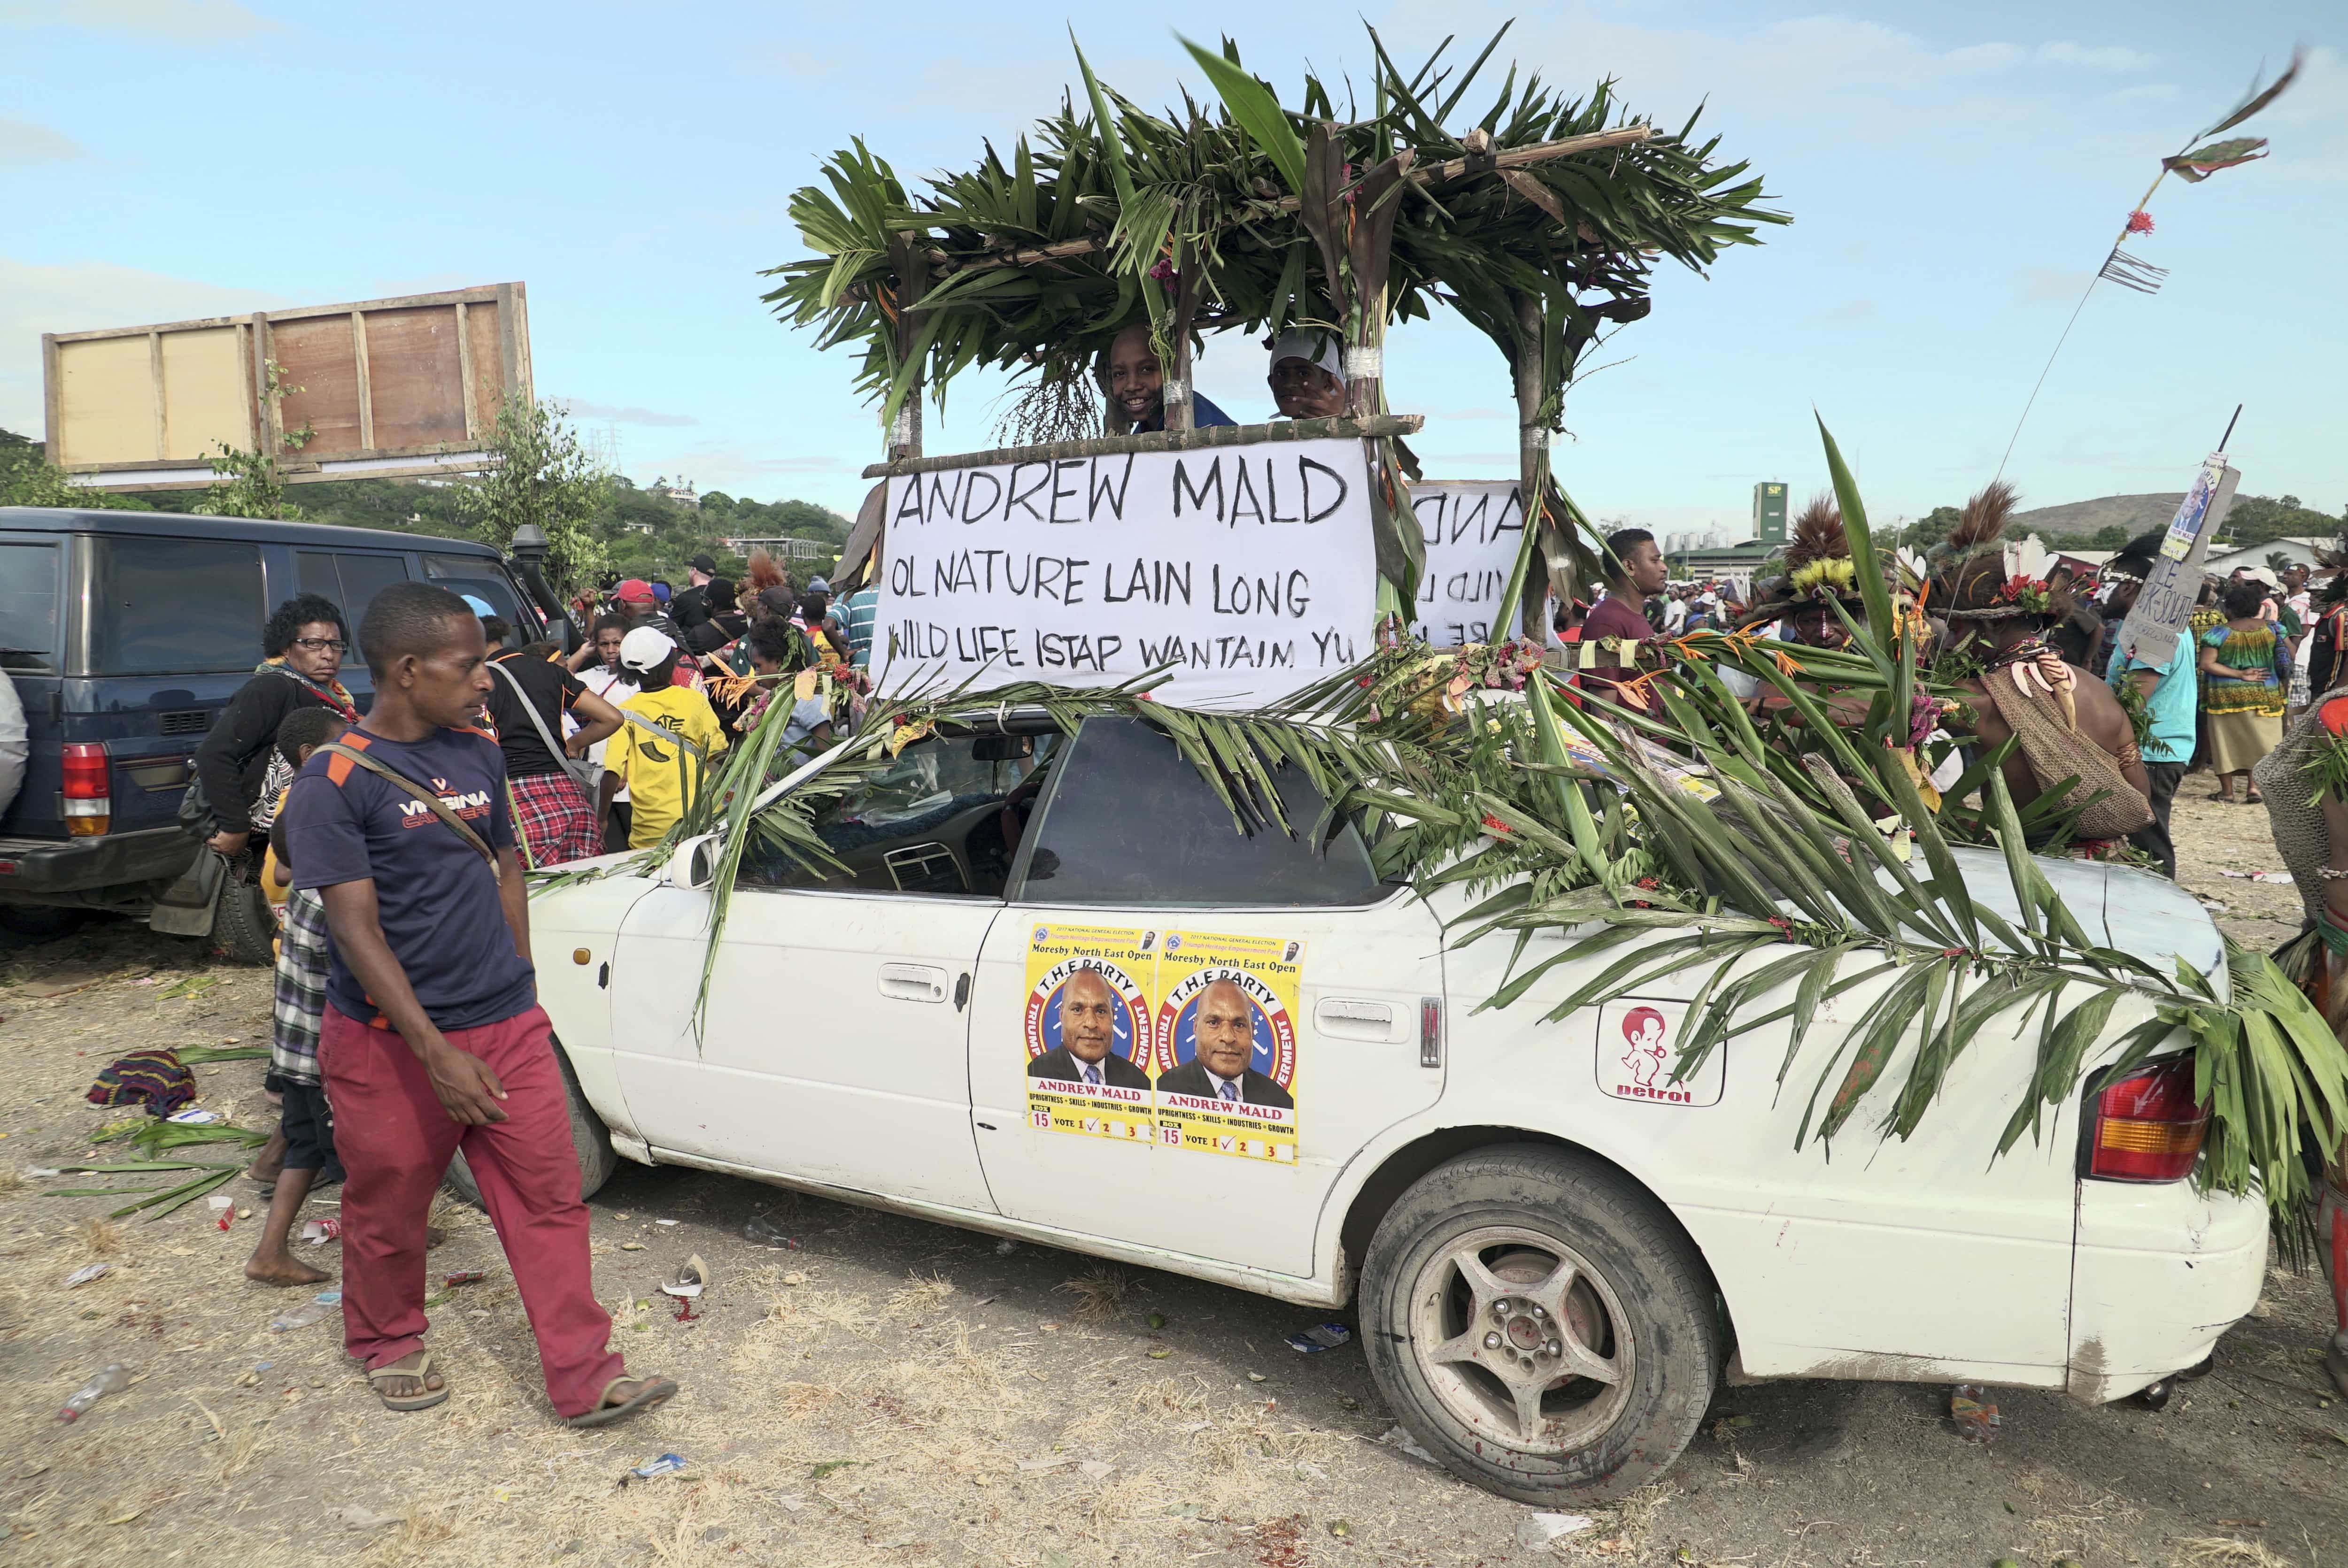 In this 21 June 2017 photo, a car is decorated with voting posters at an election rally in the Papua New Guinea capital, Port Moresby, Eric Tlozek/ABC via AP